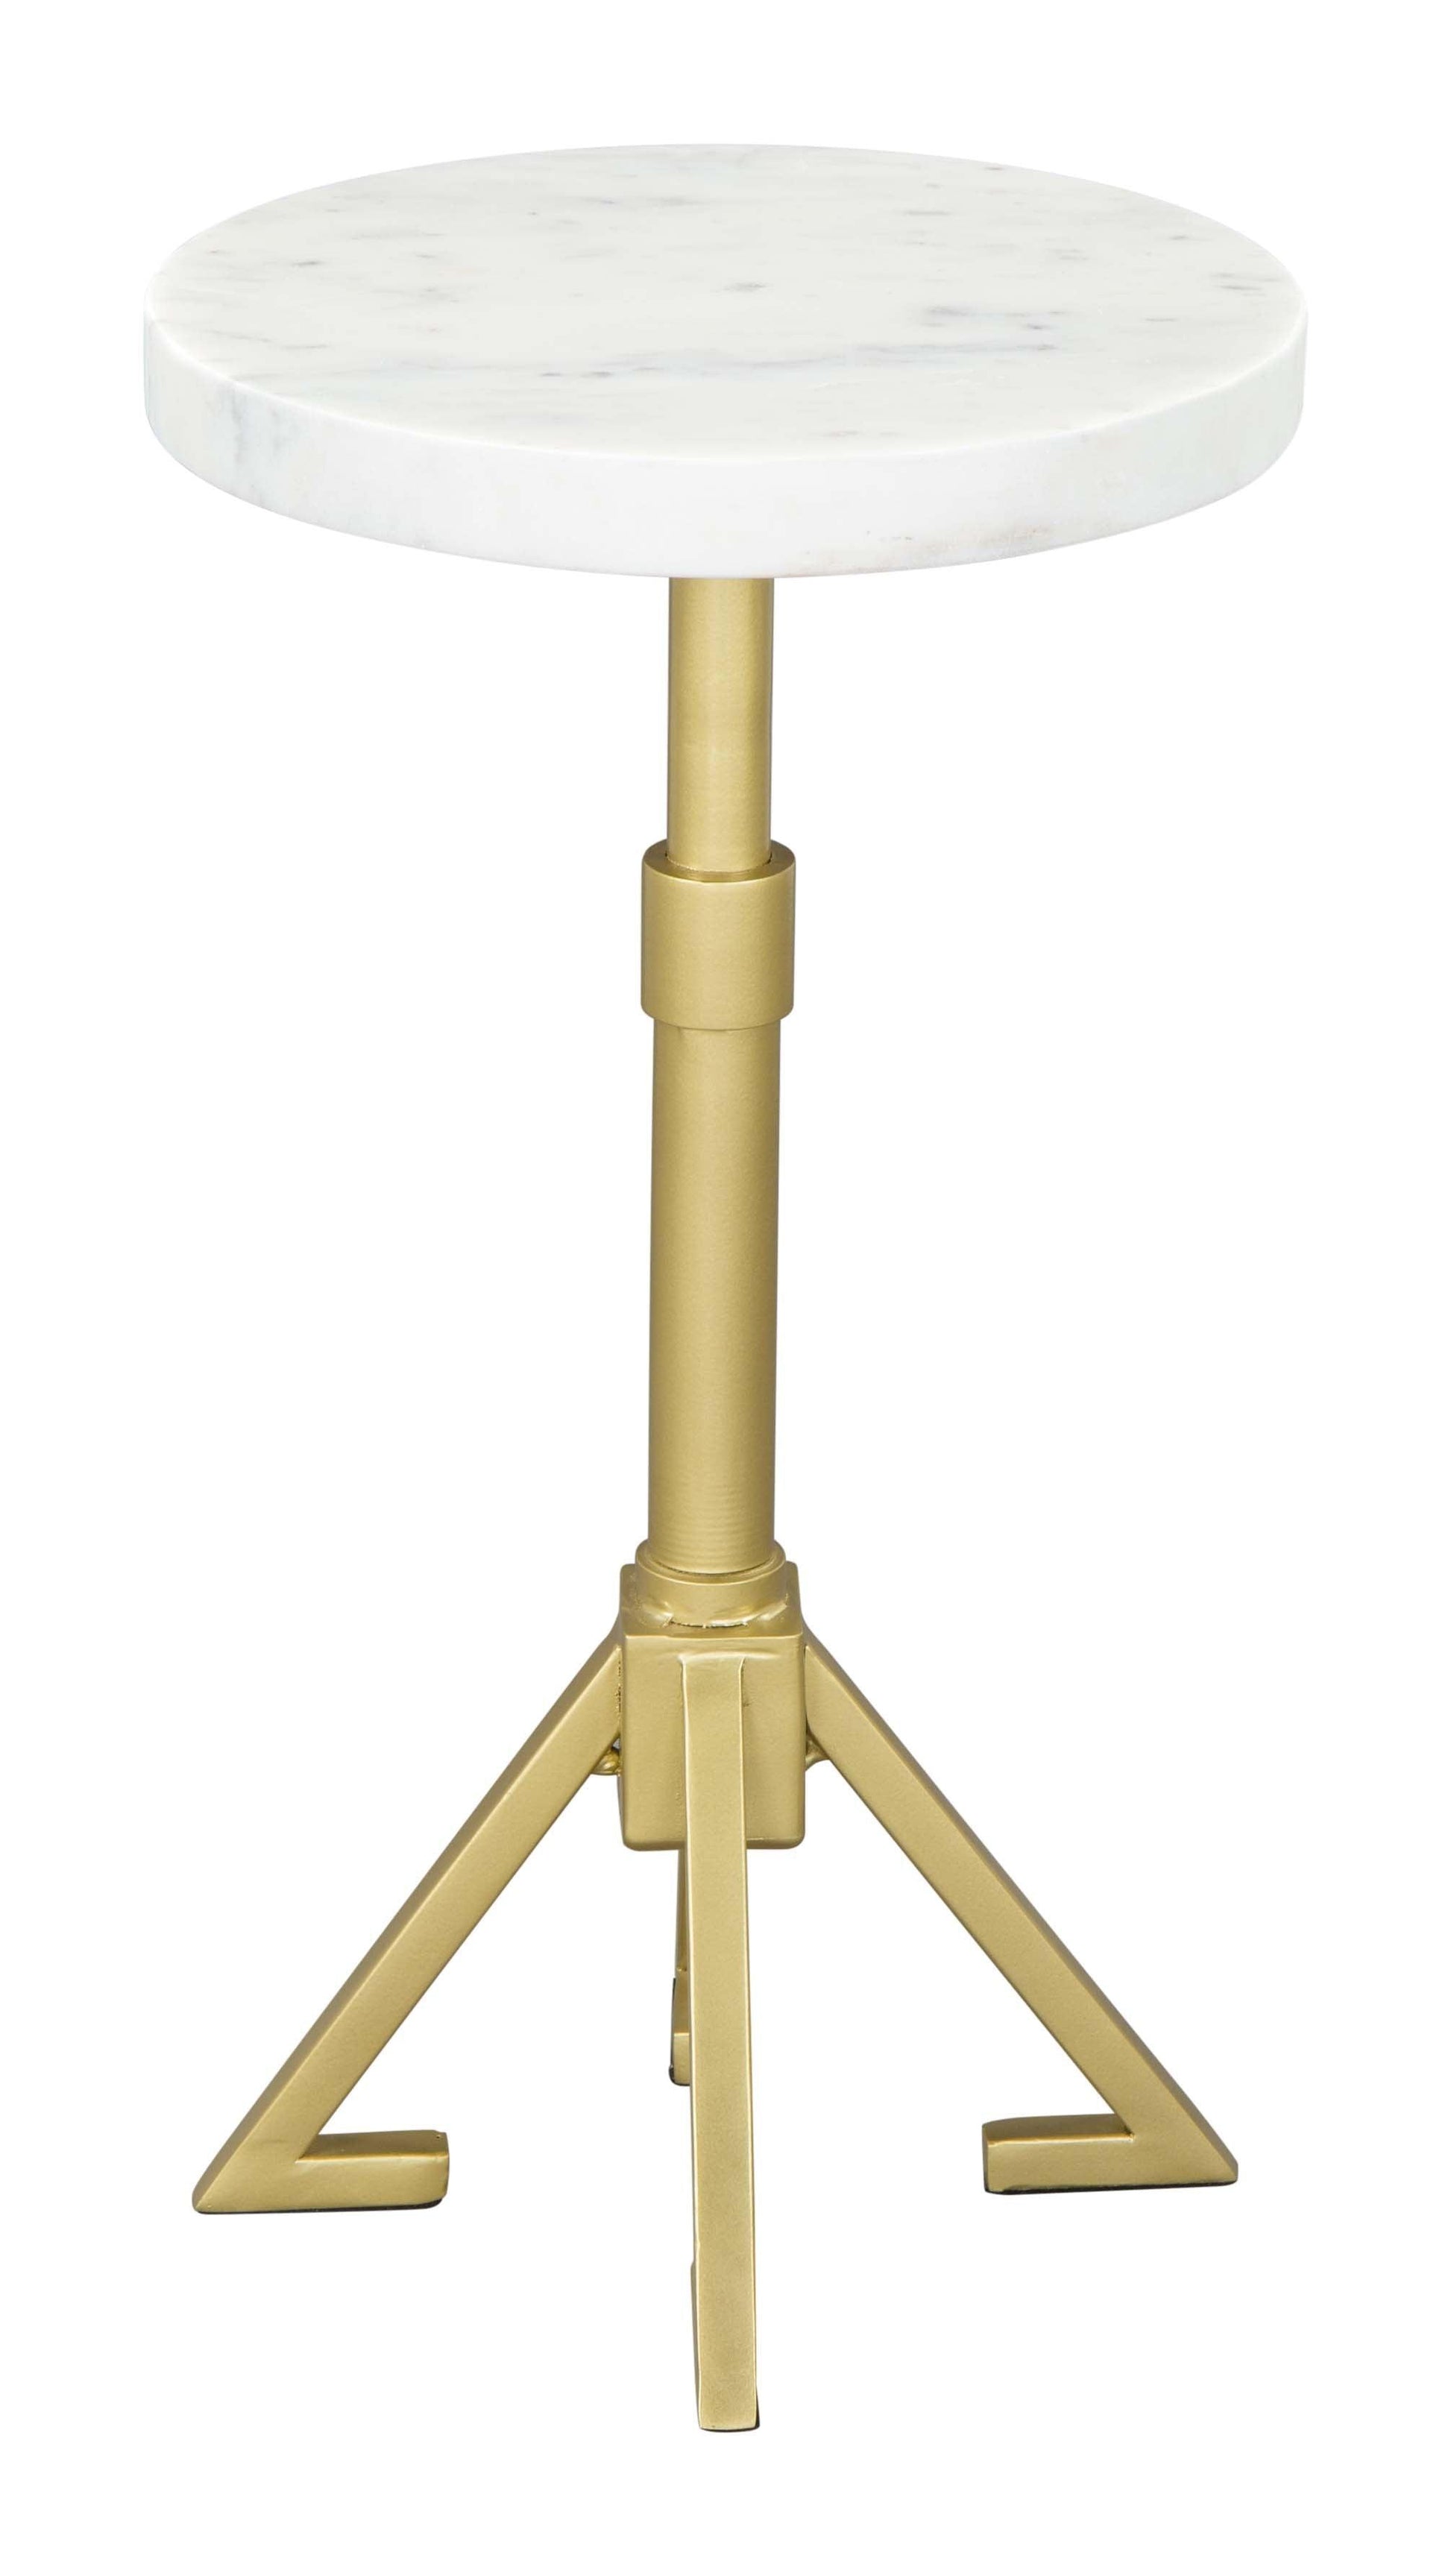 Maurice Side Table White & Gold - Sideboards and Things Accents_Gold, ADD TO FAIRE, Brand_Zuo Modern, Color_Gold, Color_White, Depth_10-20, Finish_Powder Coated, Height_20-30, Materials_Metal, Materials_Stone, Metal Type_Iron, Product Type_Side Table, Stone Type_Marble, Width_10-20